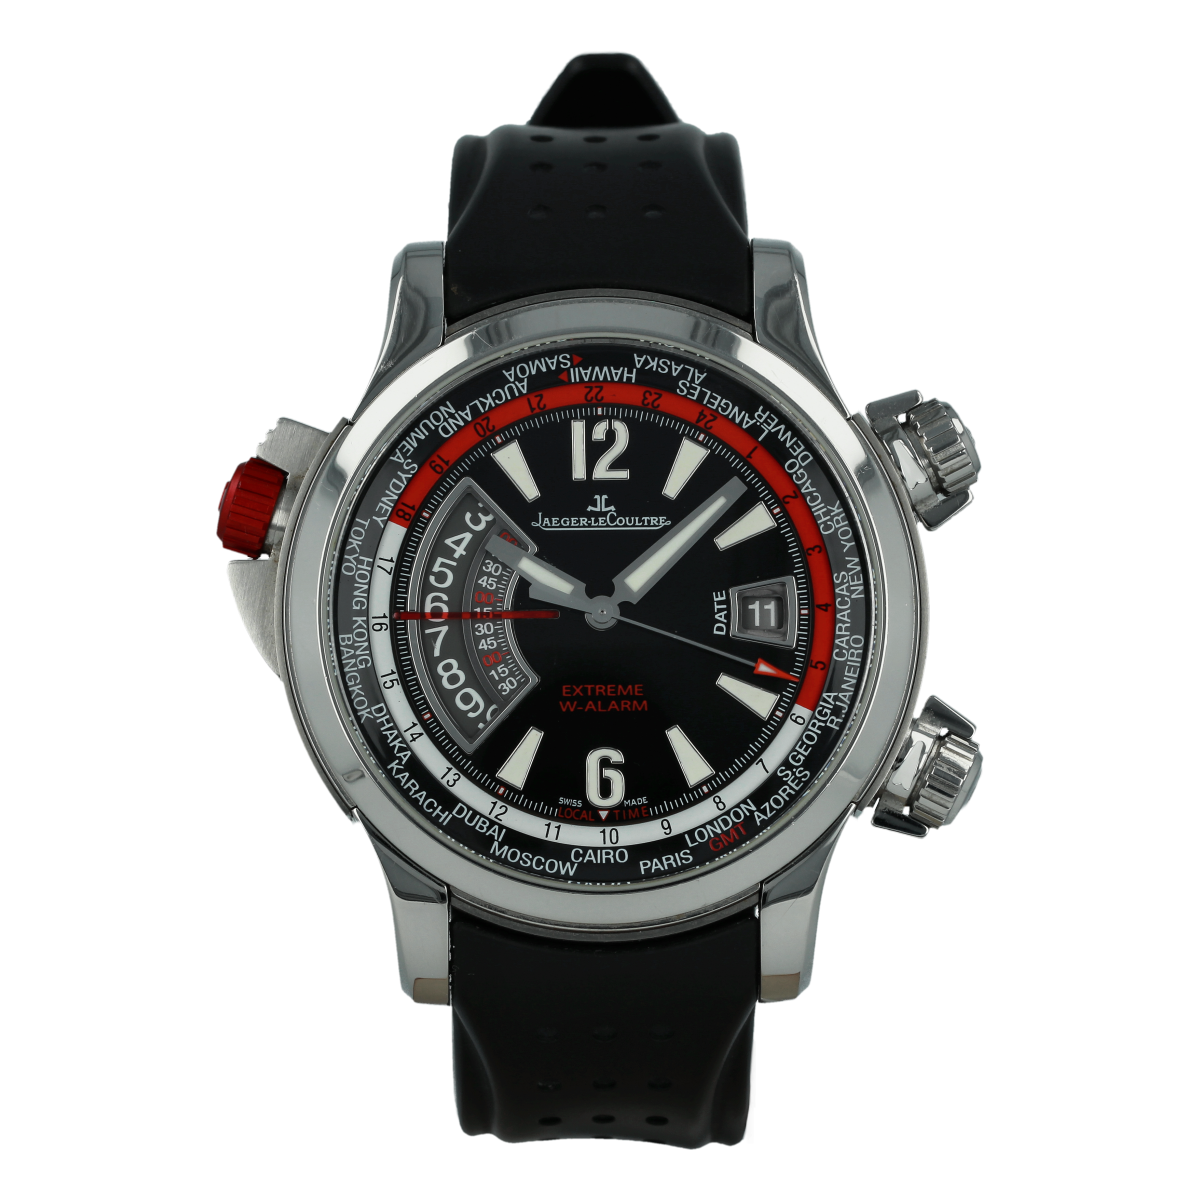 Jaeger-LeCoultre Master Compressor Extreme W-Alarm *Full Set* | Buy pre-owned Jaeger-LeCoultre watch